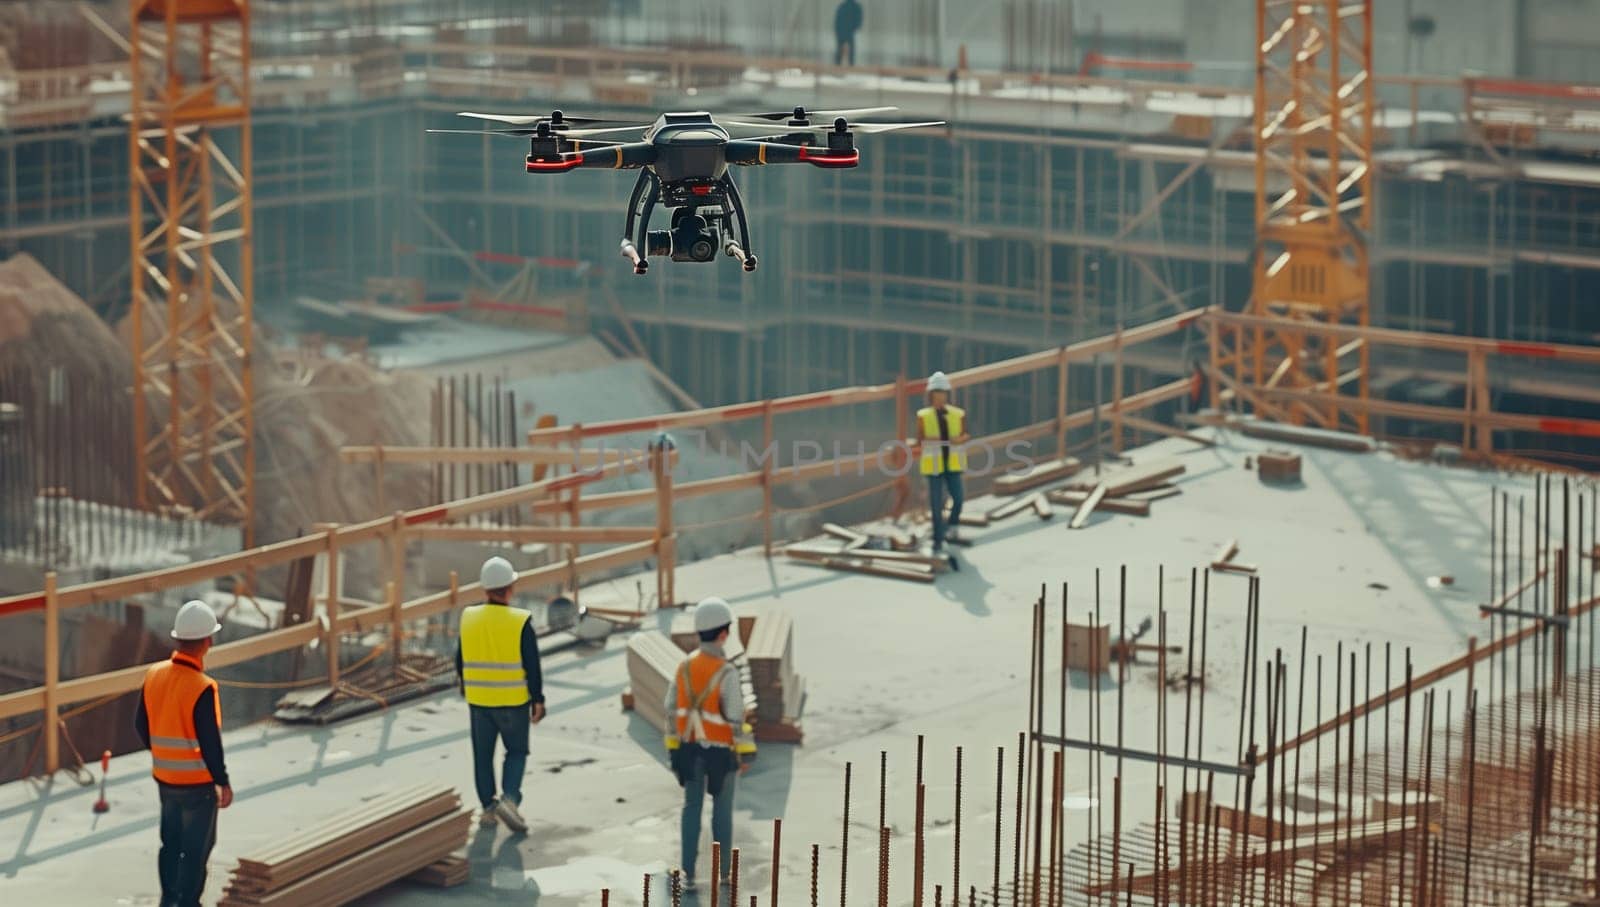 A drone is surveying a building project in an urban city by richwolf